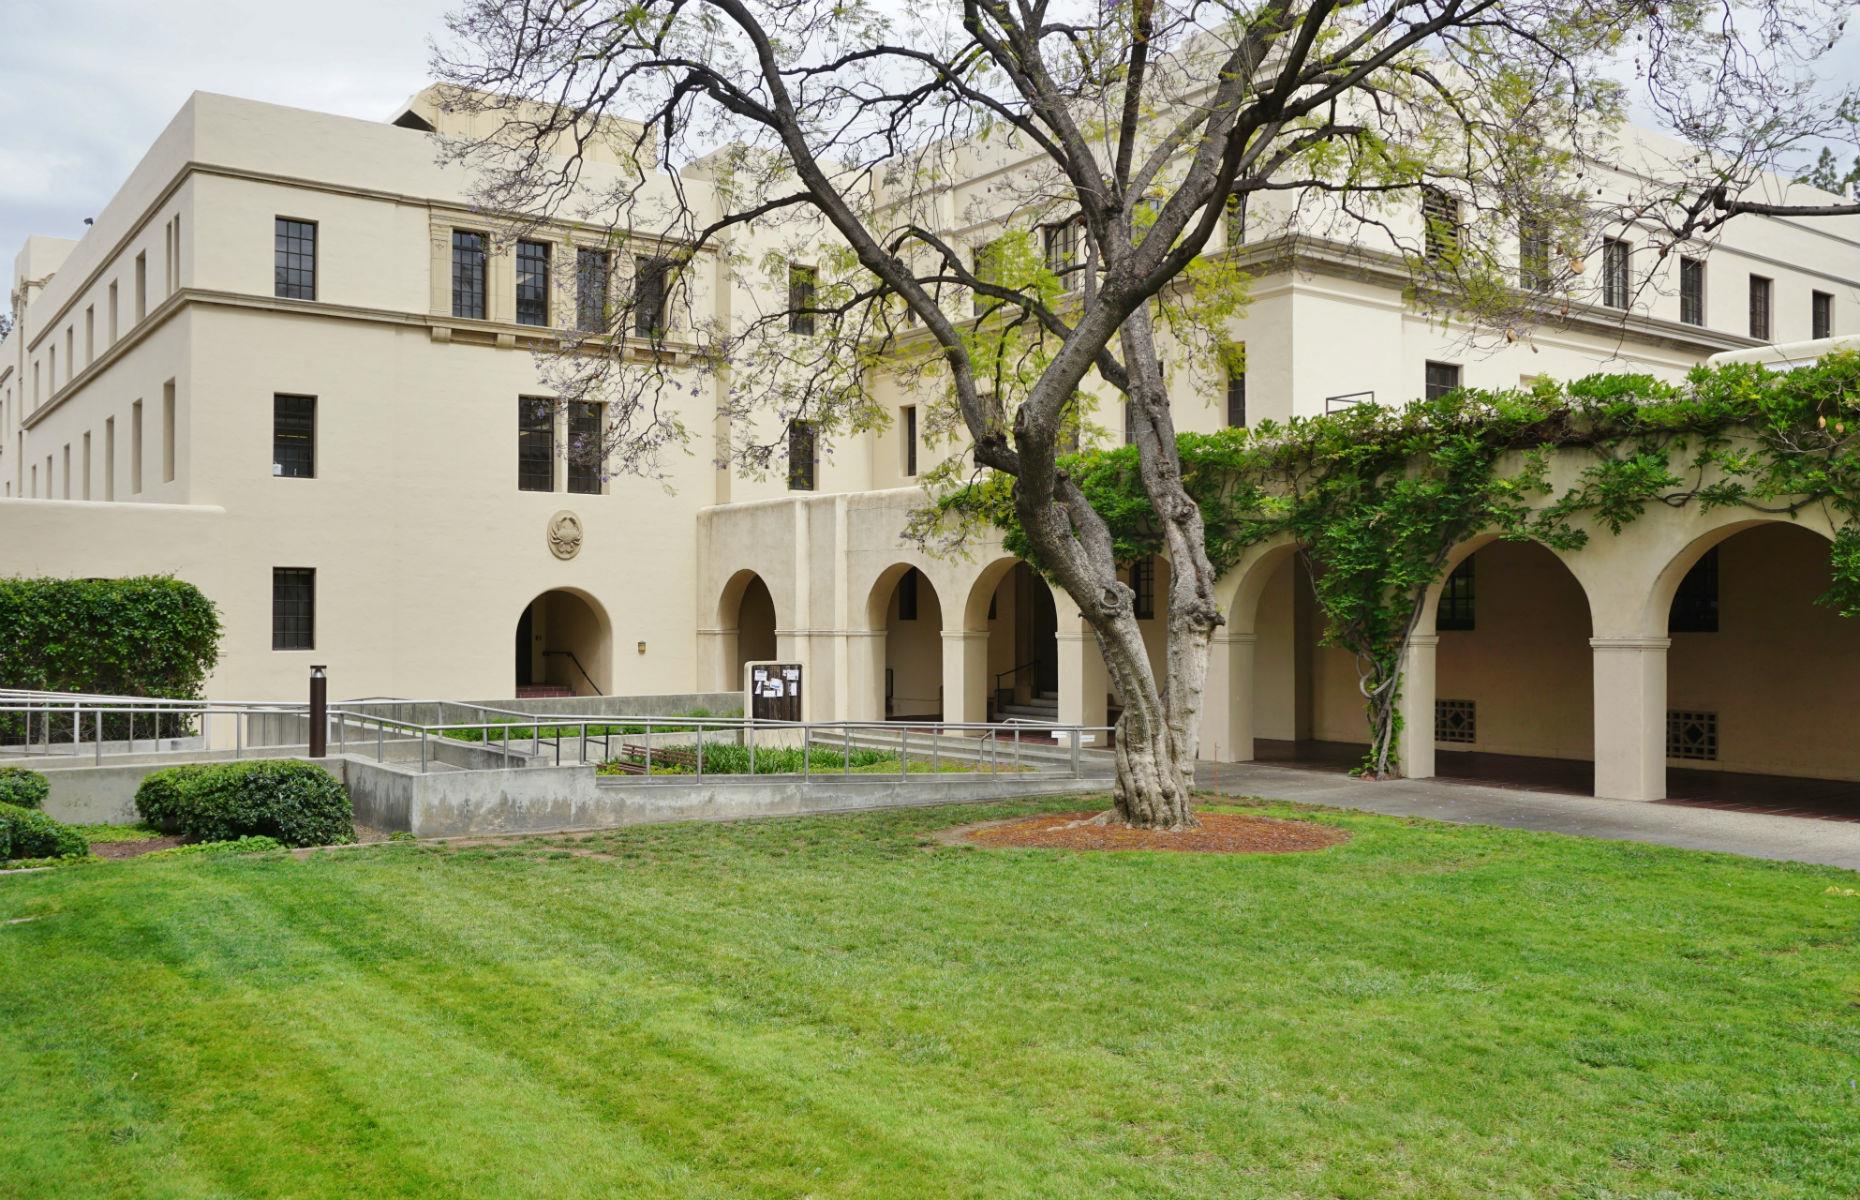 Joint 3) California Institute of Technology, California, US